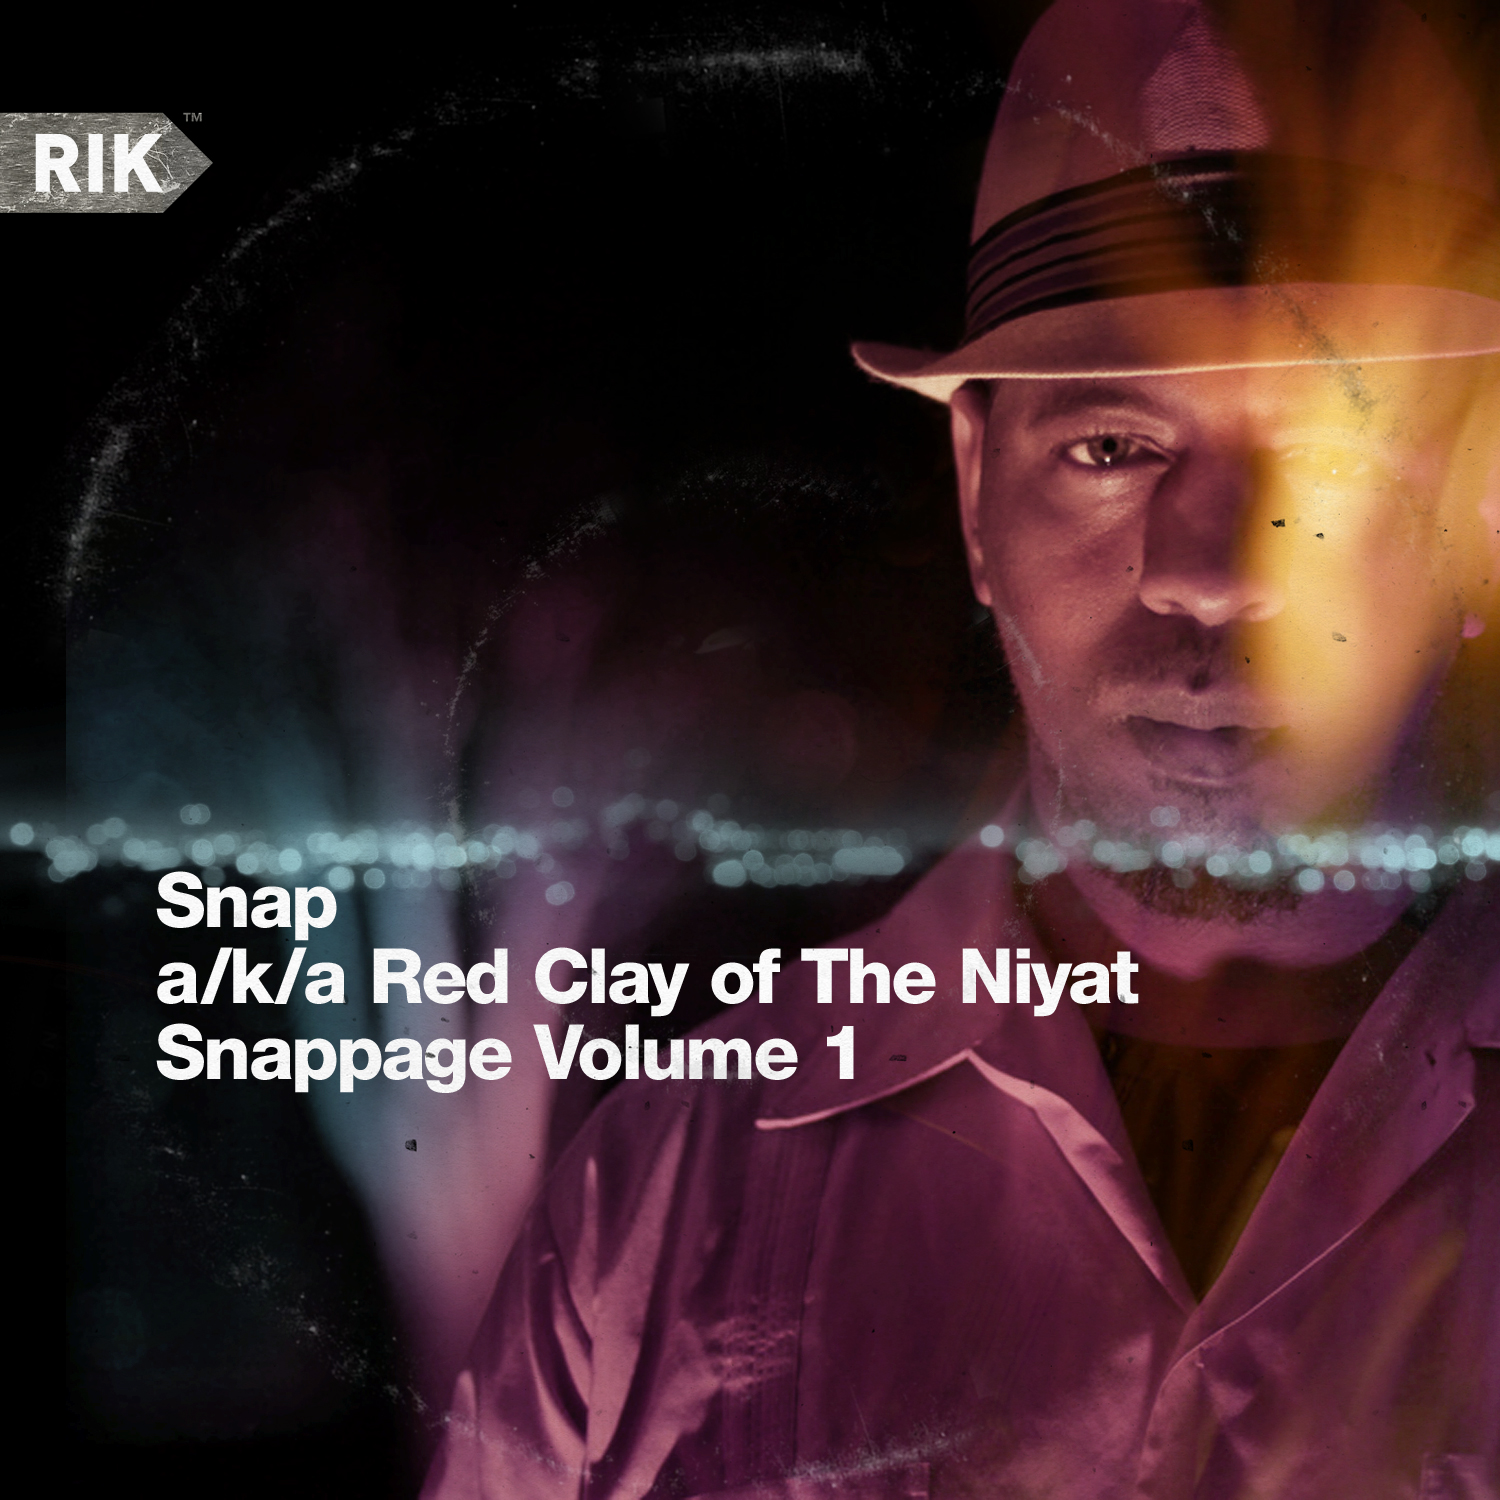 Snap a/k/a Red Clay of The Niyat — Snappage Volume 1